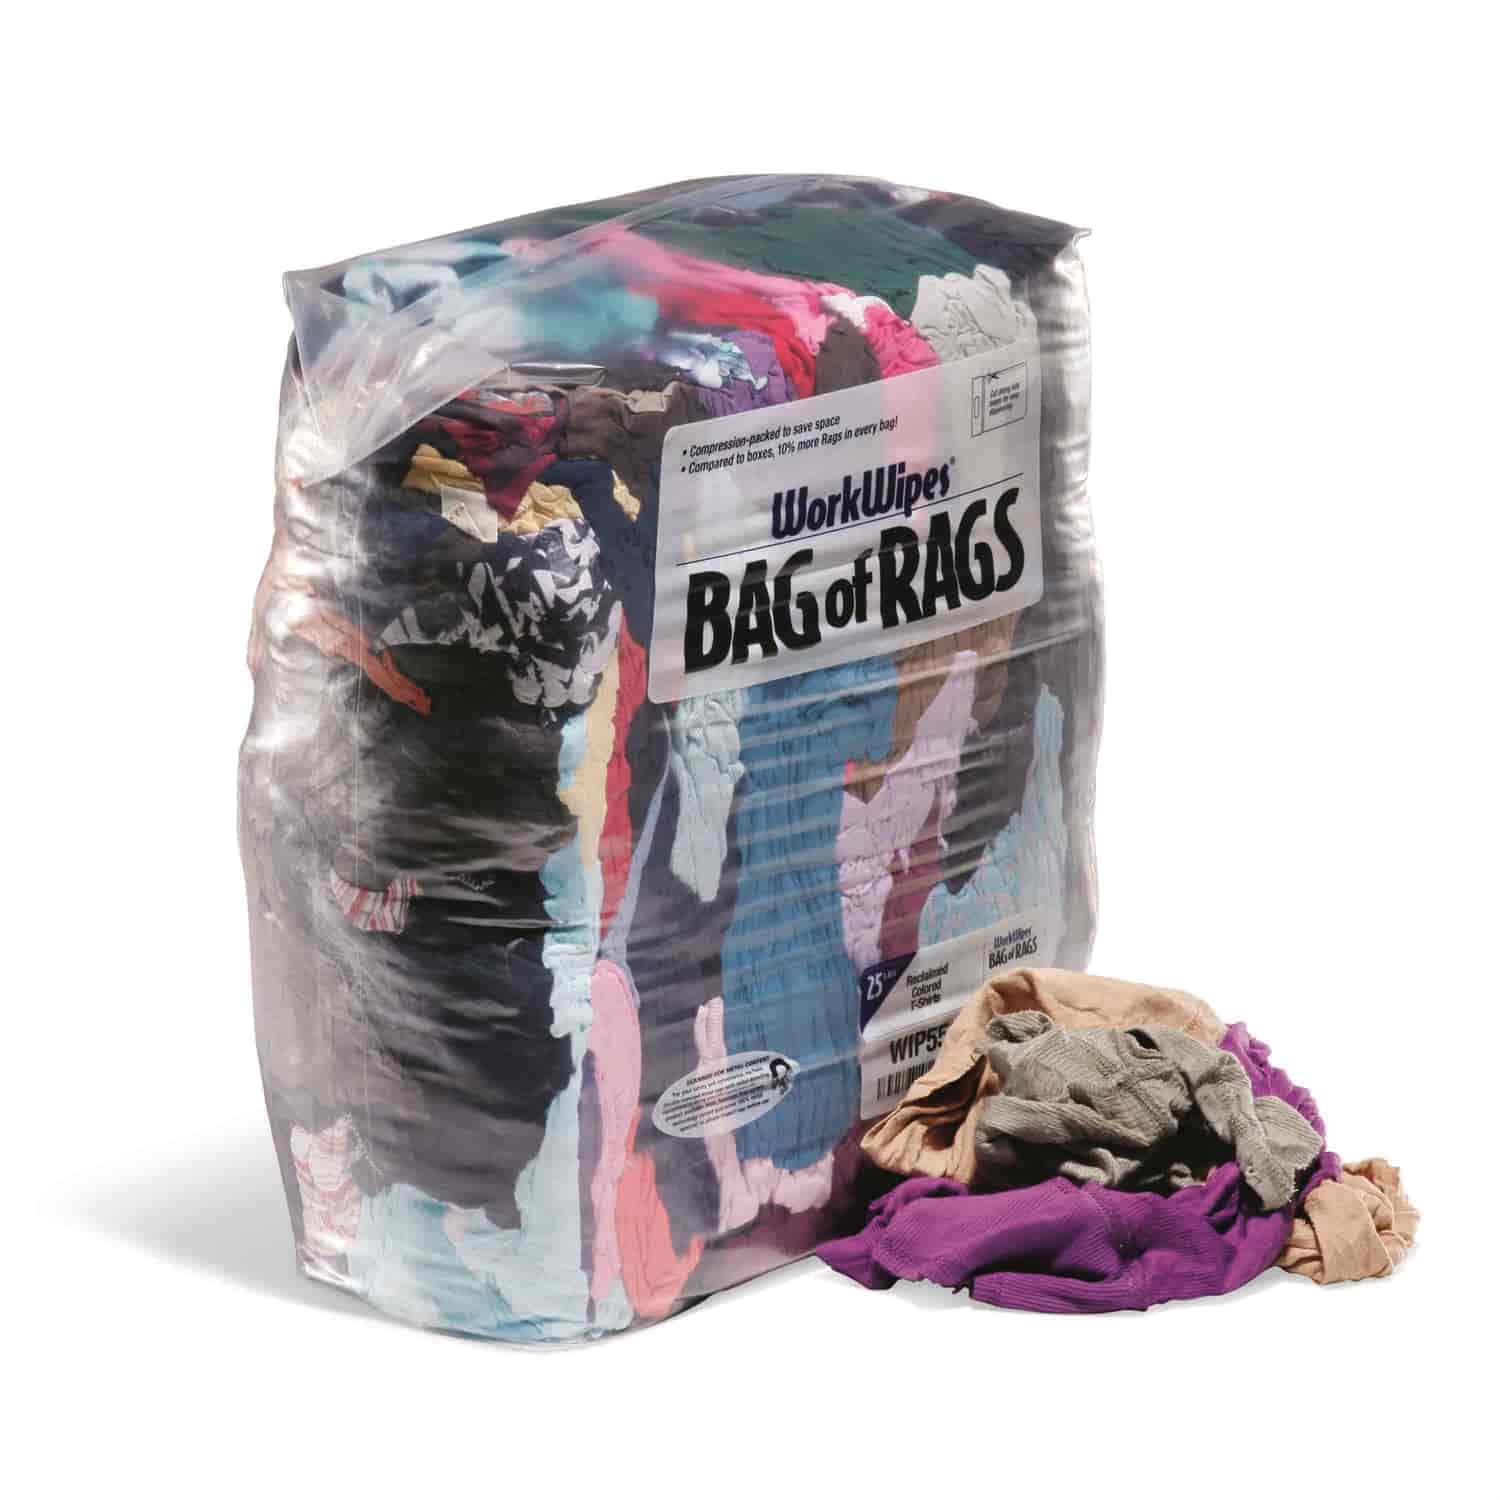 WorkWipes Bag of Rags [Reclaimed Colored T-Shirt]